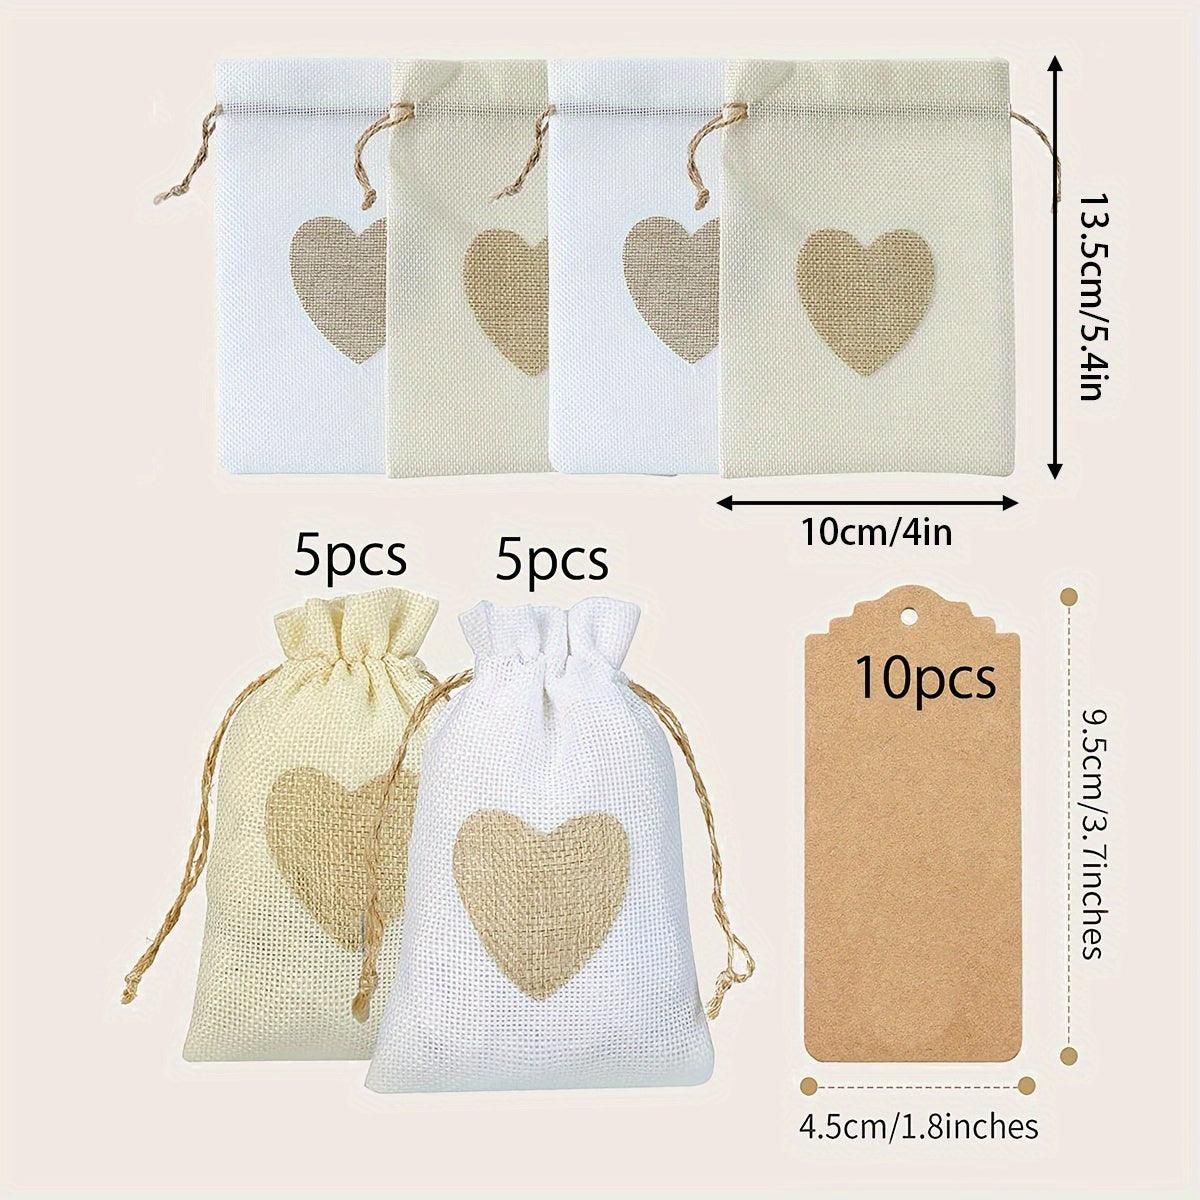 20pcs Beige And White Linen Burlap Candy Gift Bag 4x6 Inch Drawstring Gift Wedding Party Favors Cosmetic Perfume Grid Bag - Lasercutwraps Shop